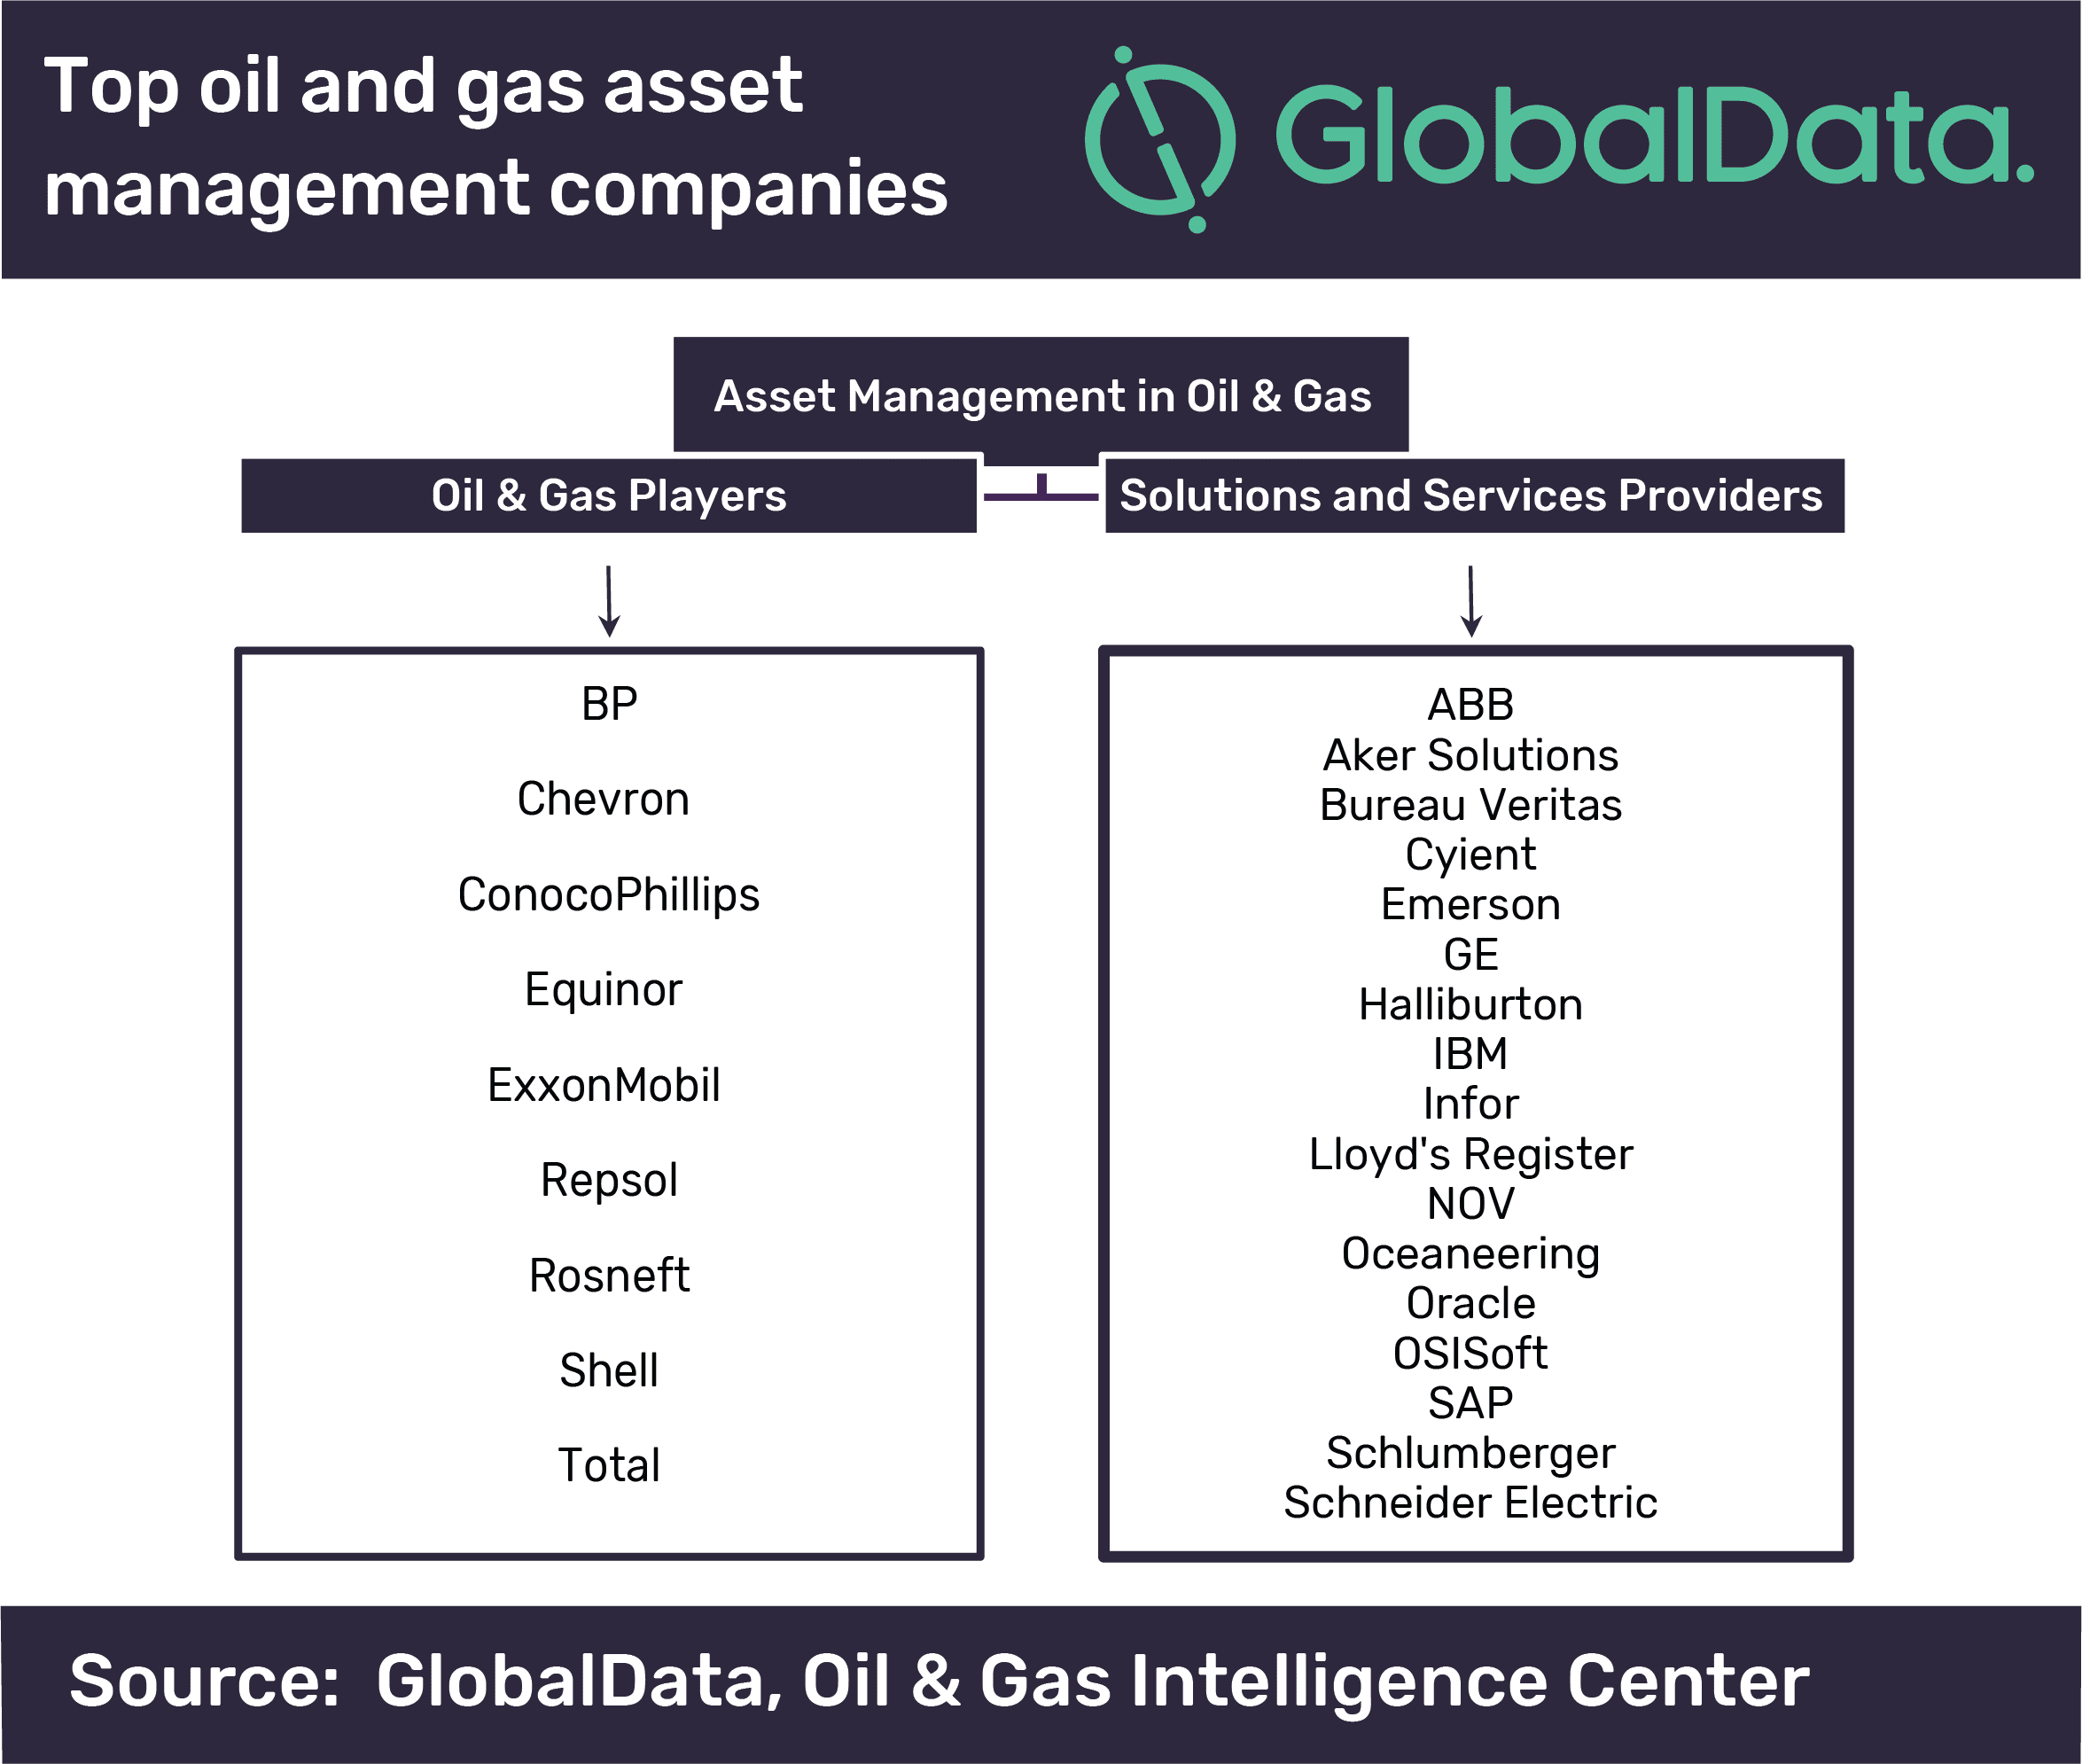 Increasing emphasis placed on asset management in oil and gas operations required, says GlobalData